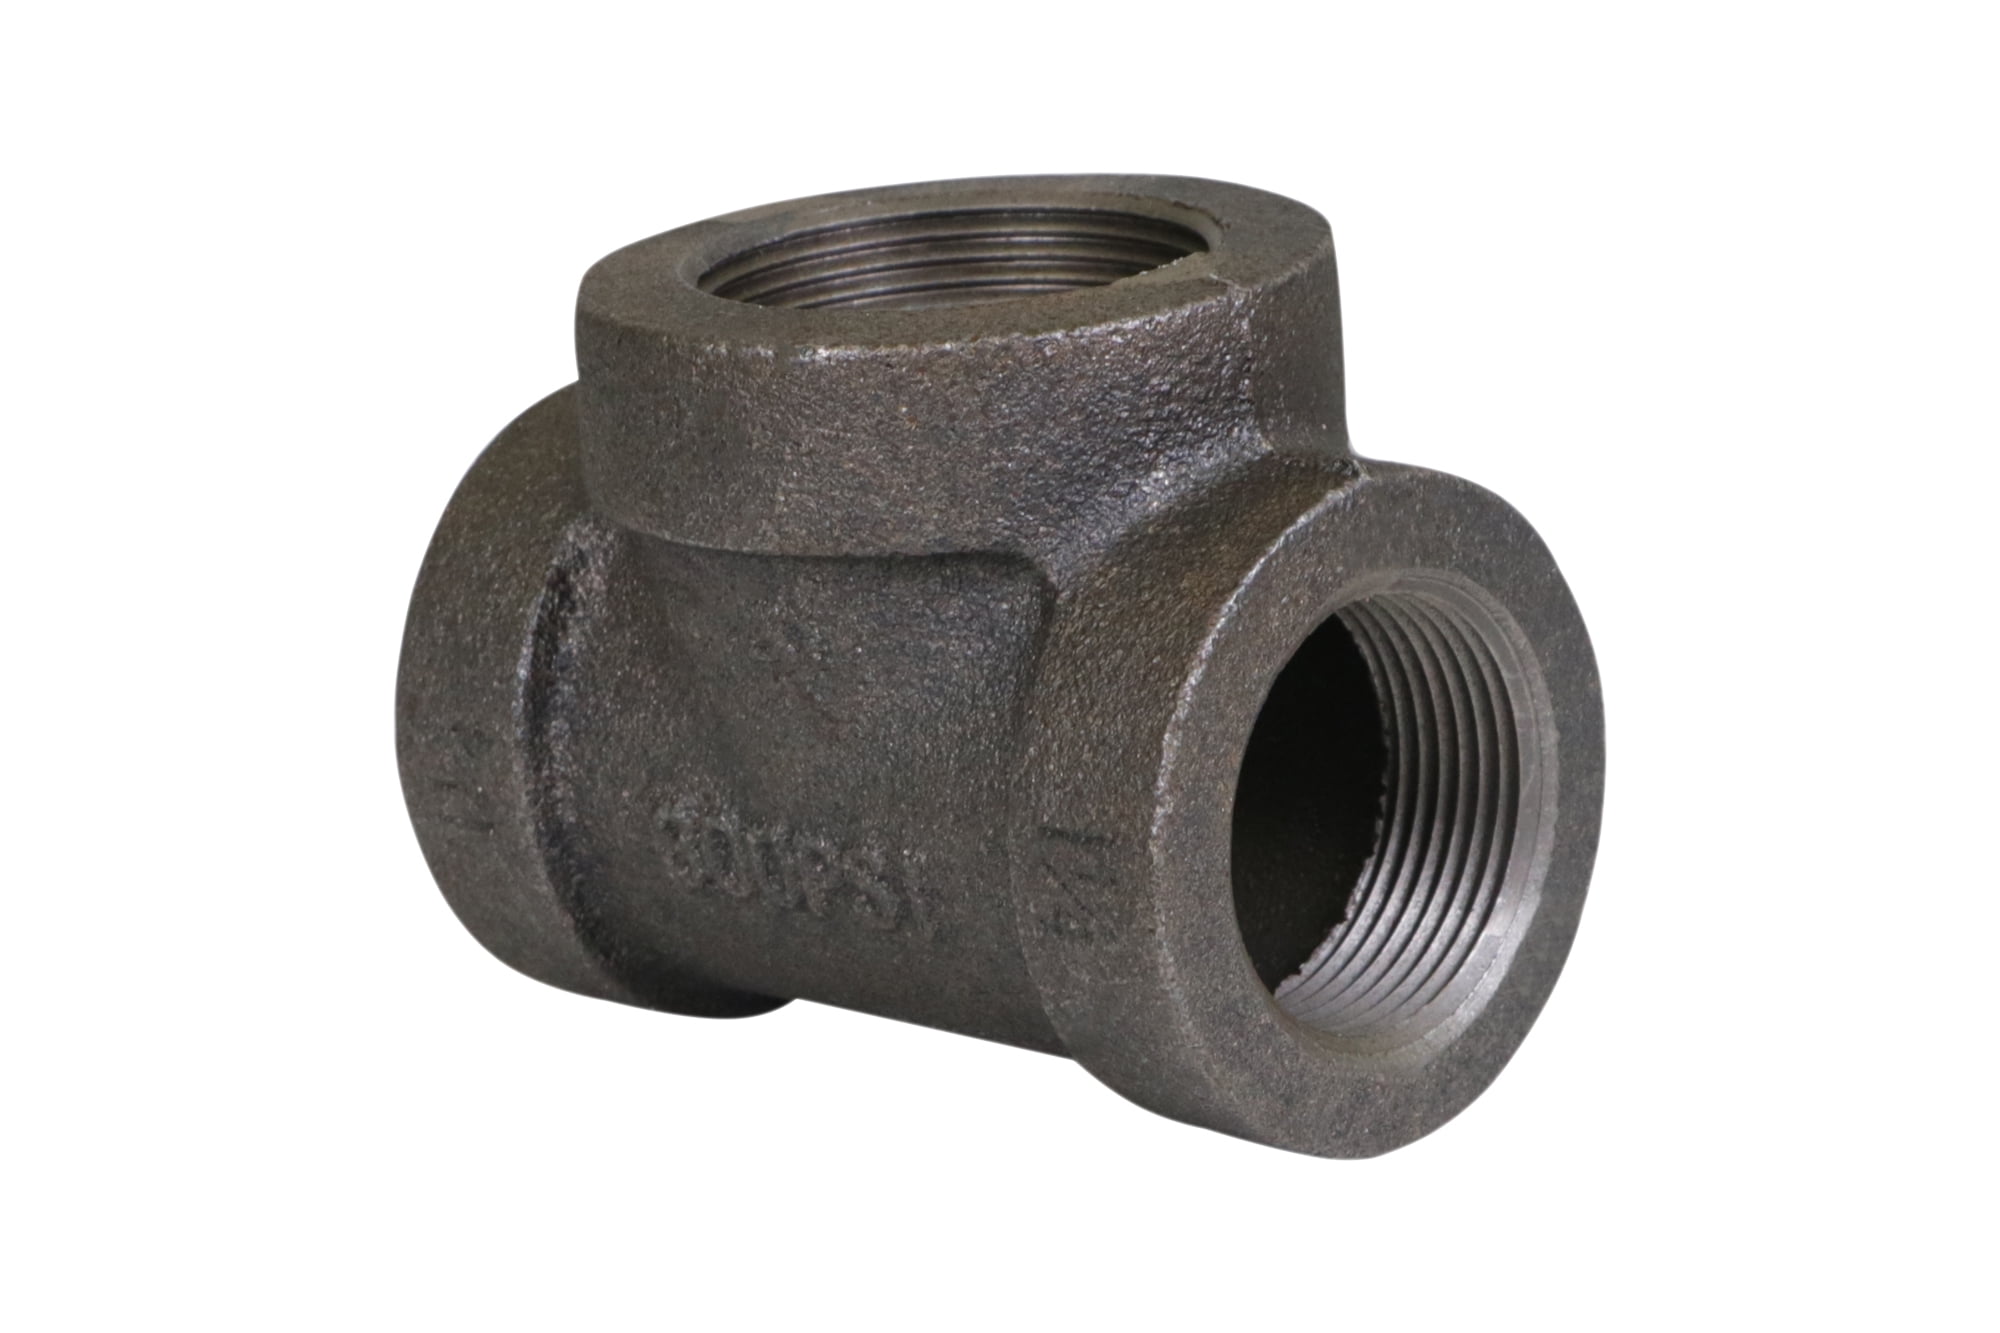 Black Malleable Iron Tee Pipe Fitting 25mm 1" 